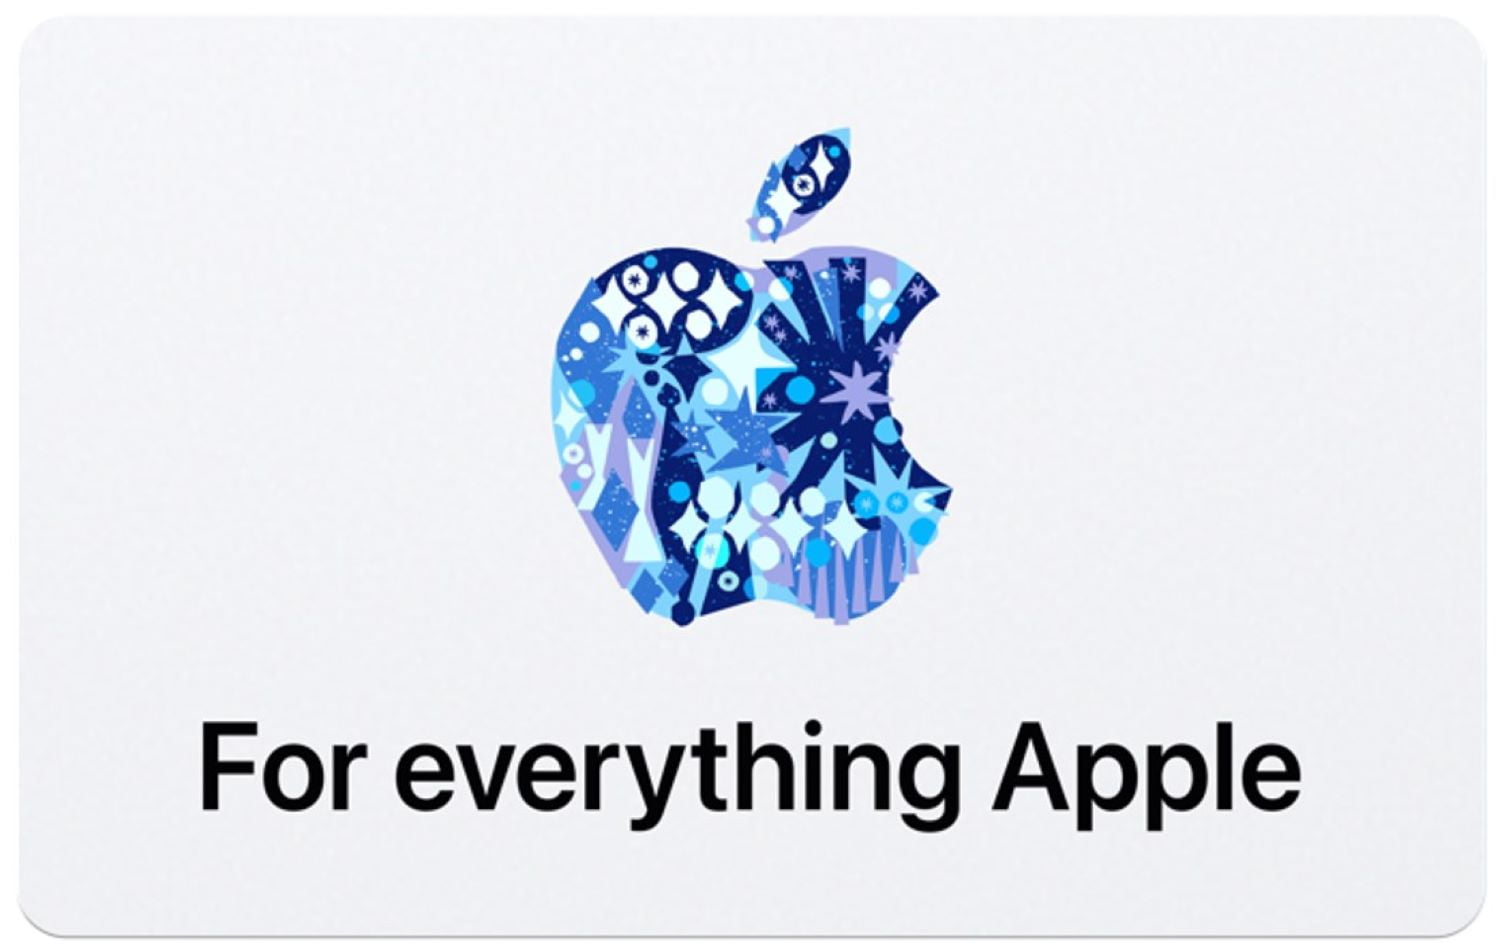  Apple Gift Card - App Store, iTunes, iPhone, iPad, AirPods,  MacBook, accessories and more : Gift Cards